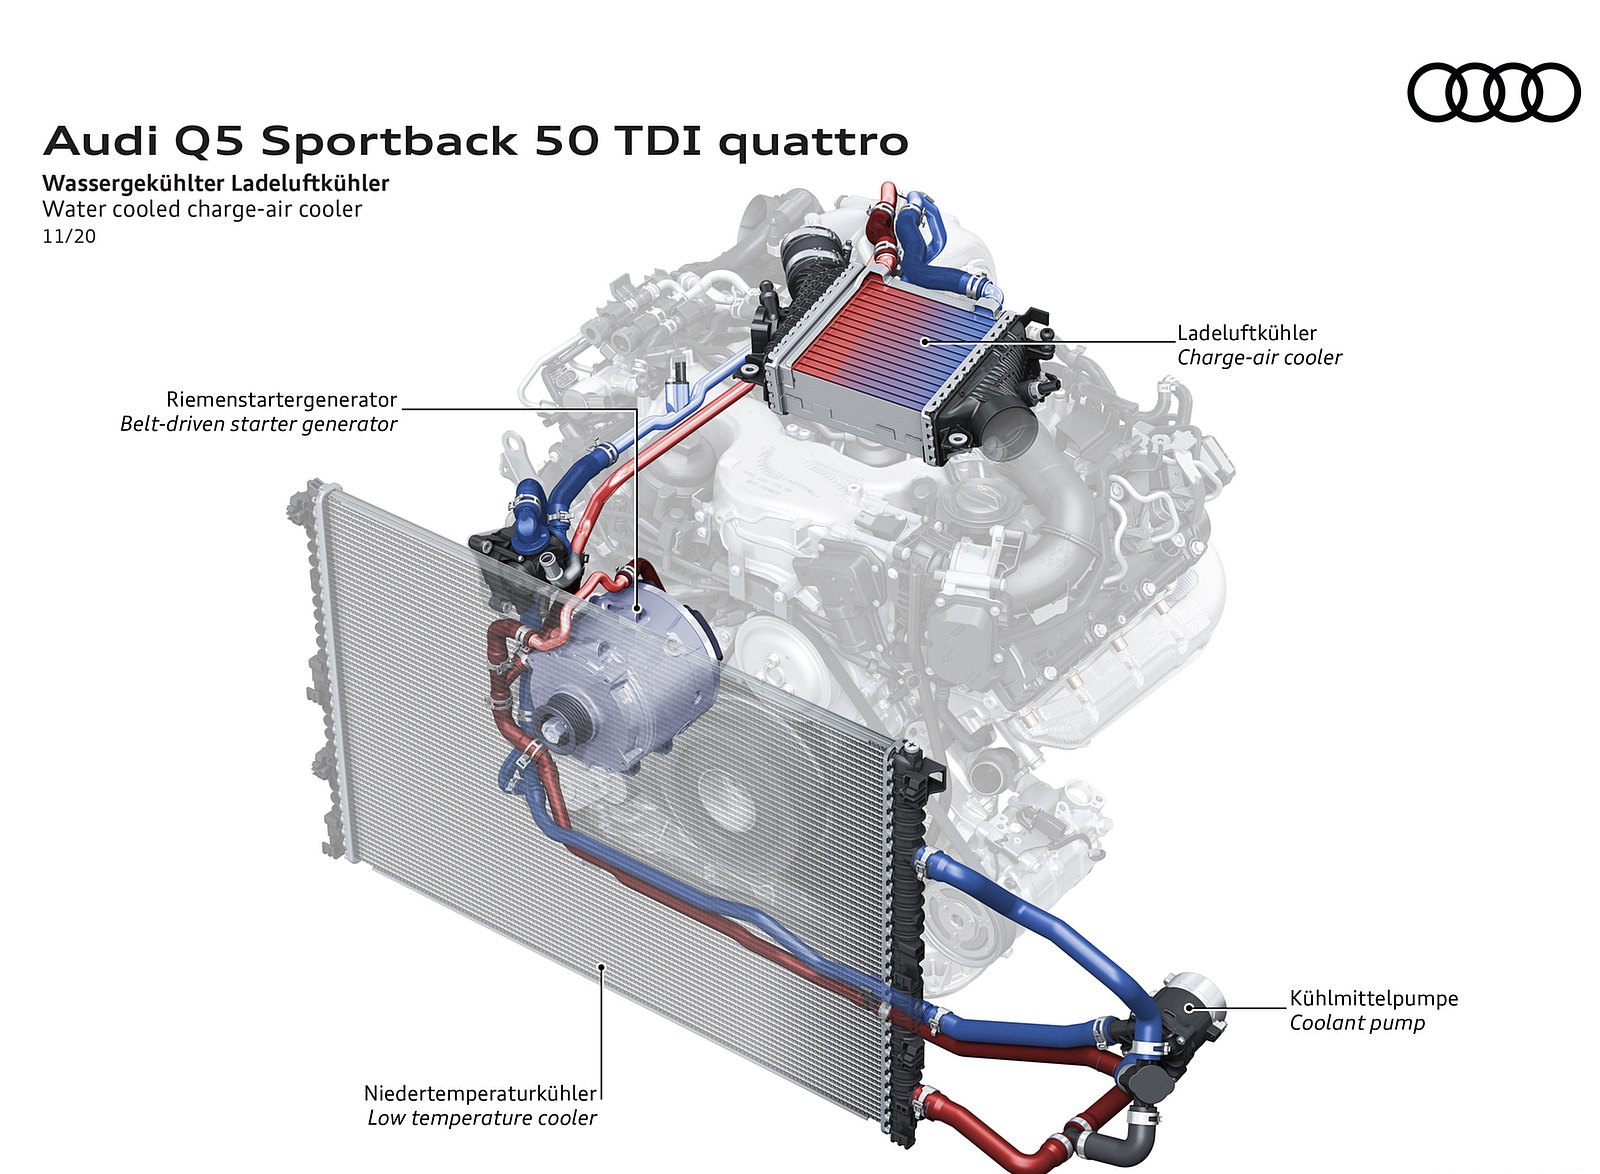 2021 Audi Q5 Sportback Water cooled charge-air cooler Wallpapers #114 of 158